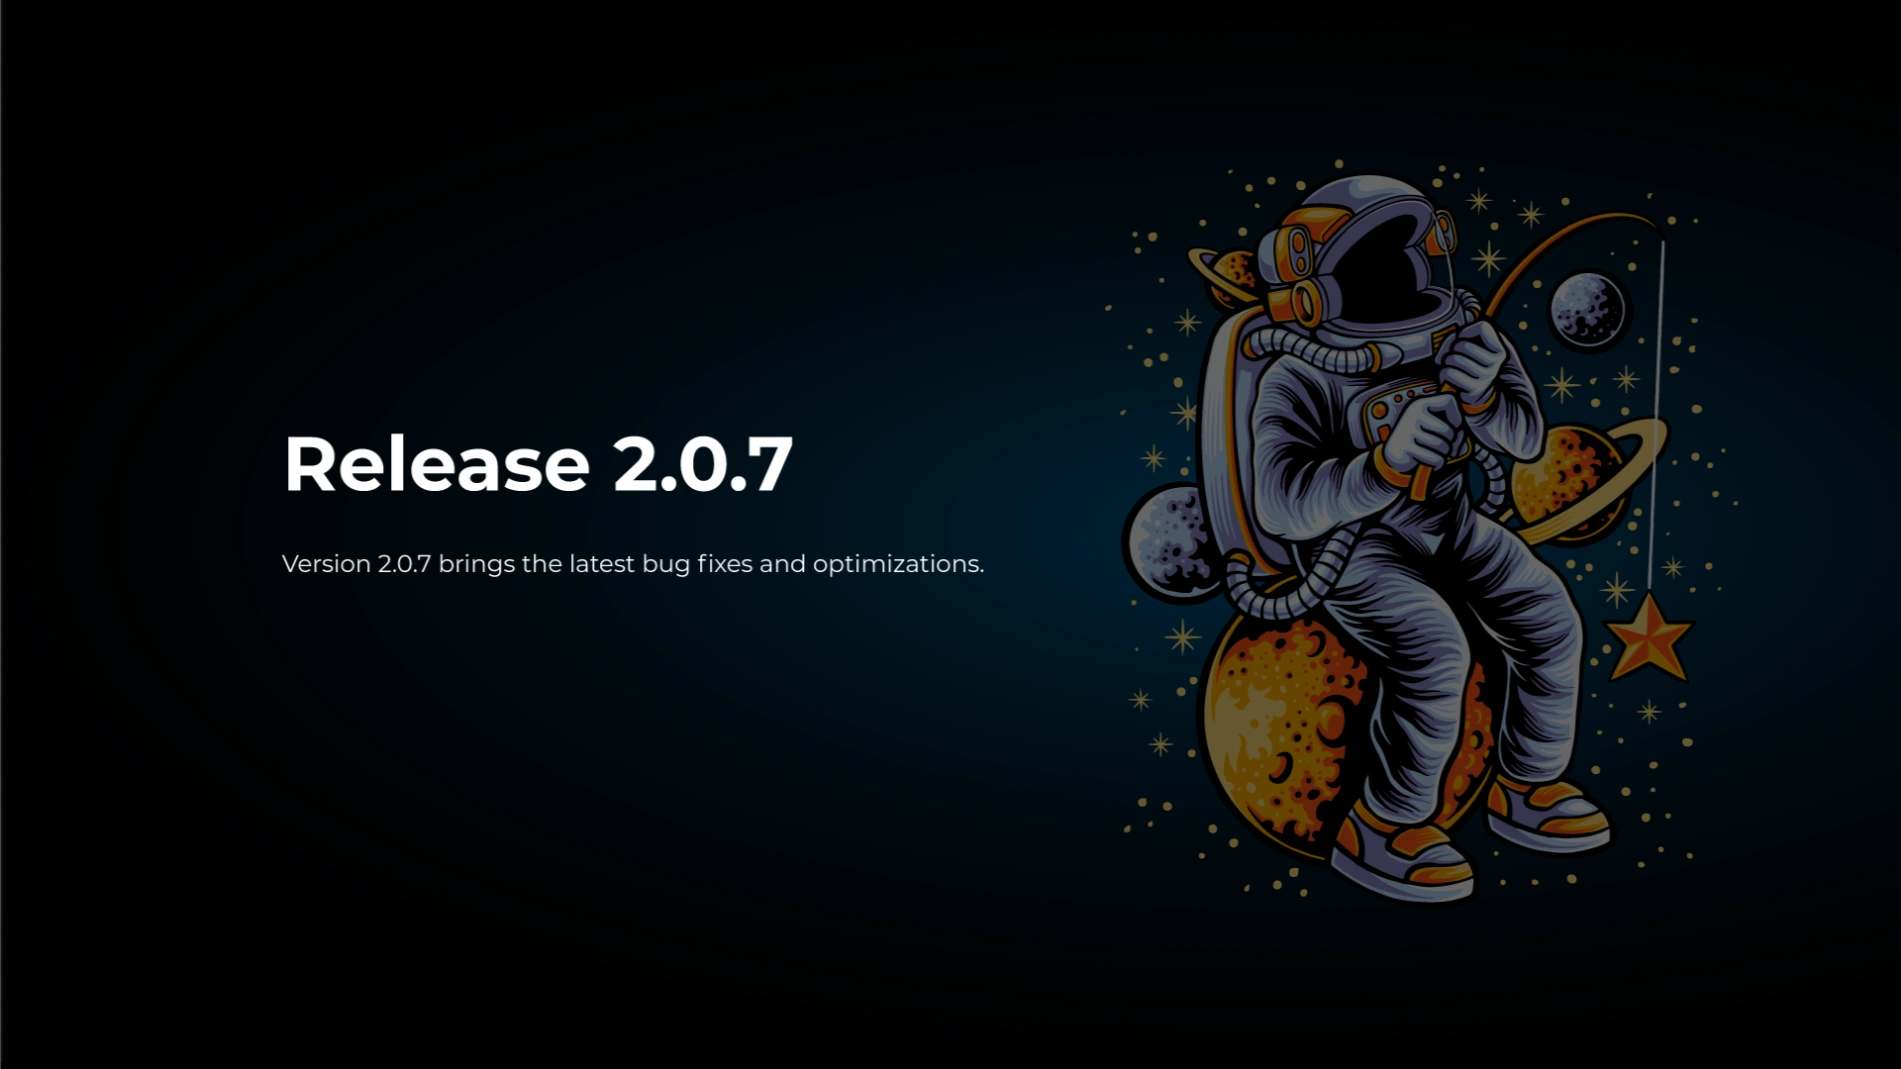 Release 2.0.7